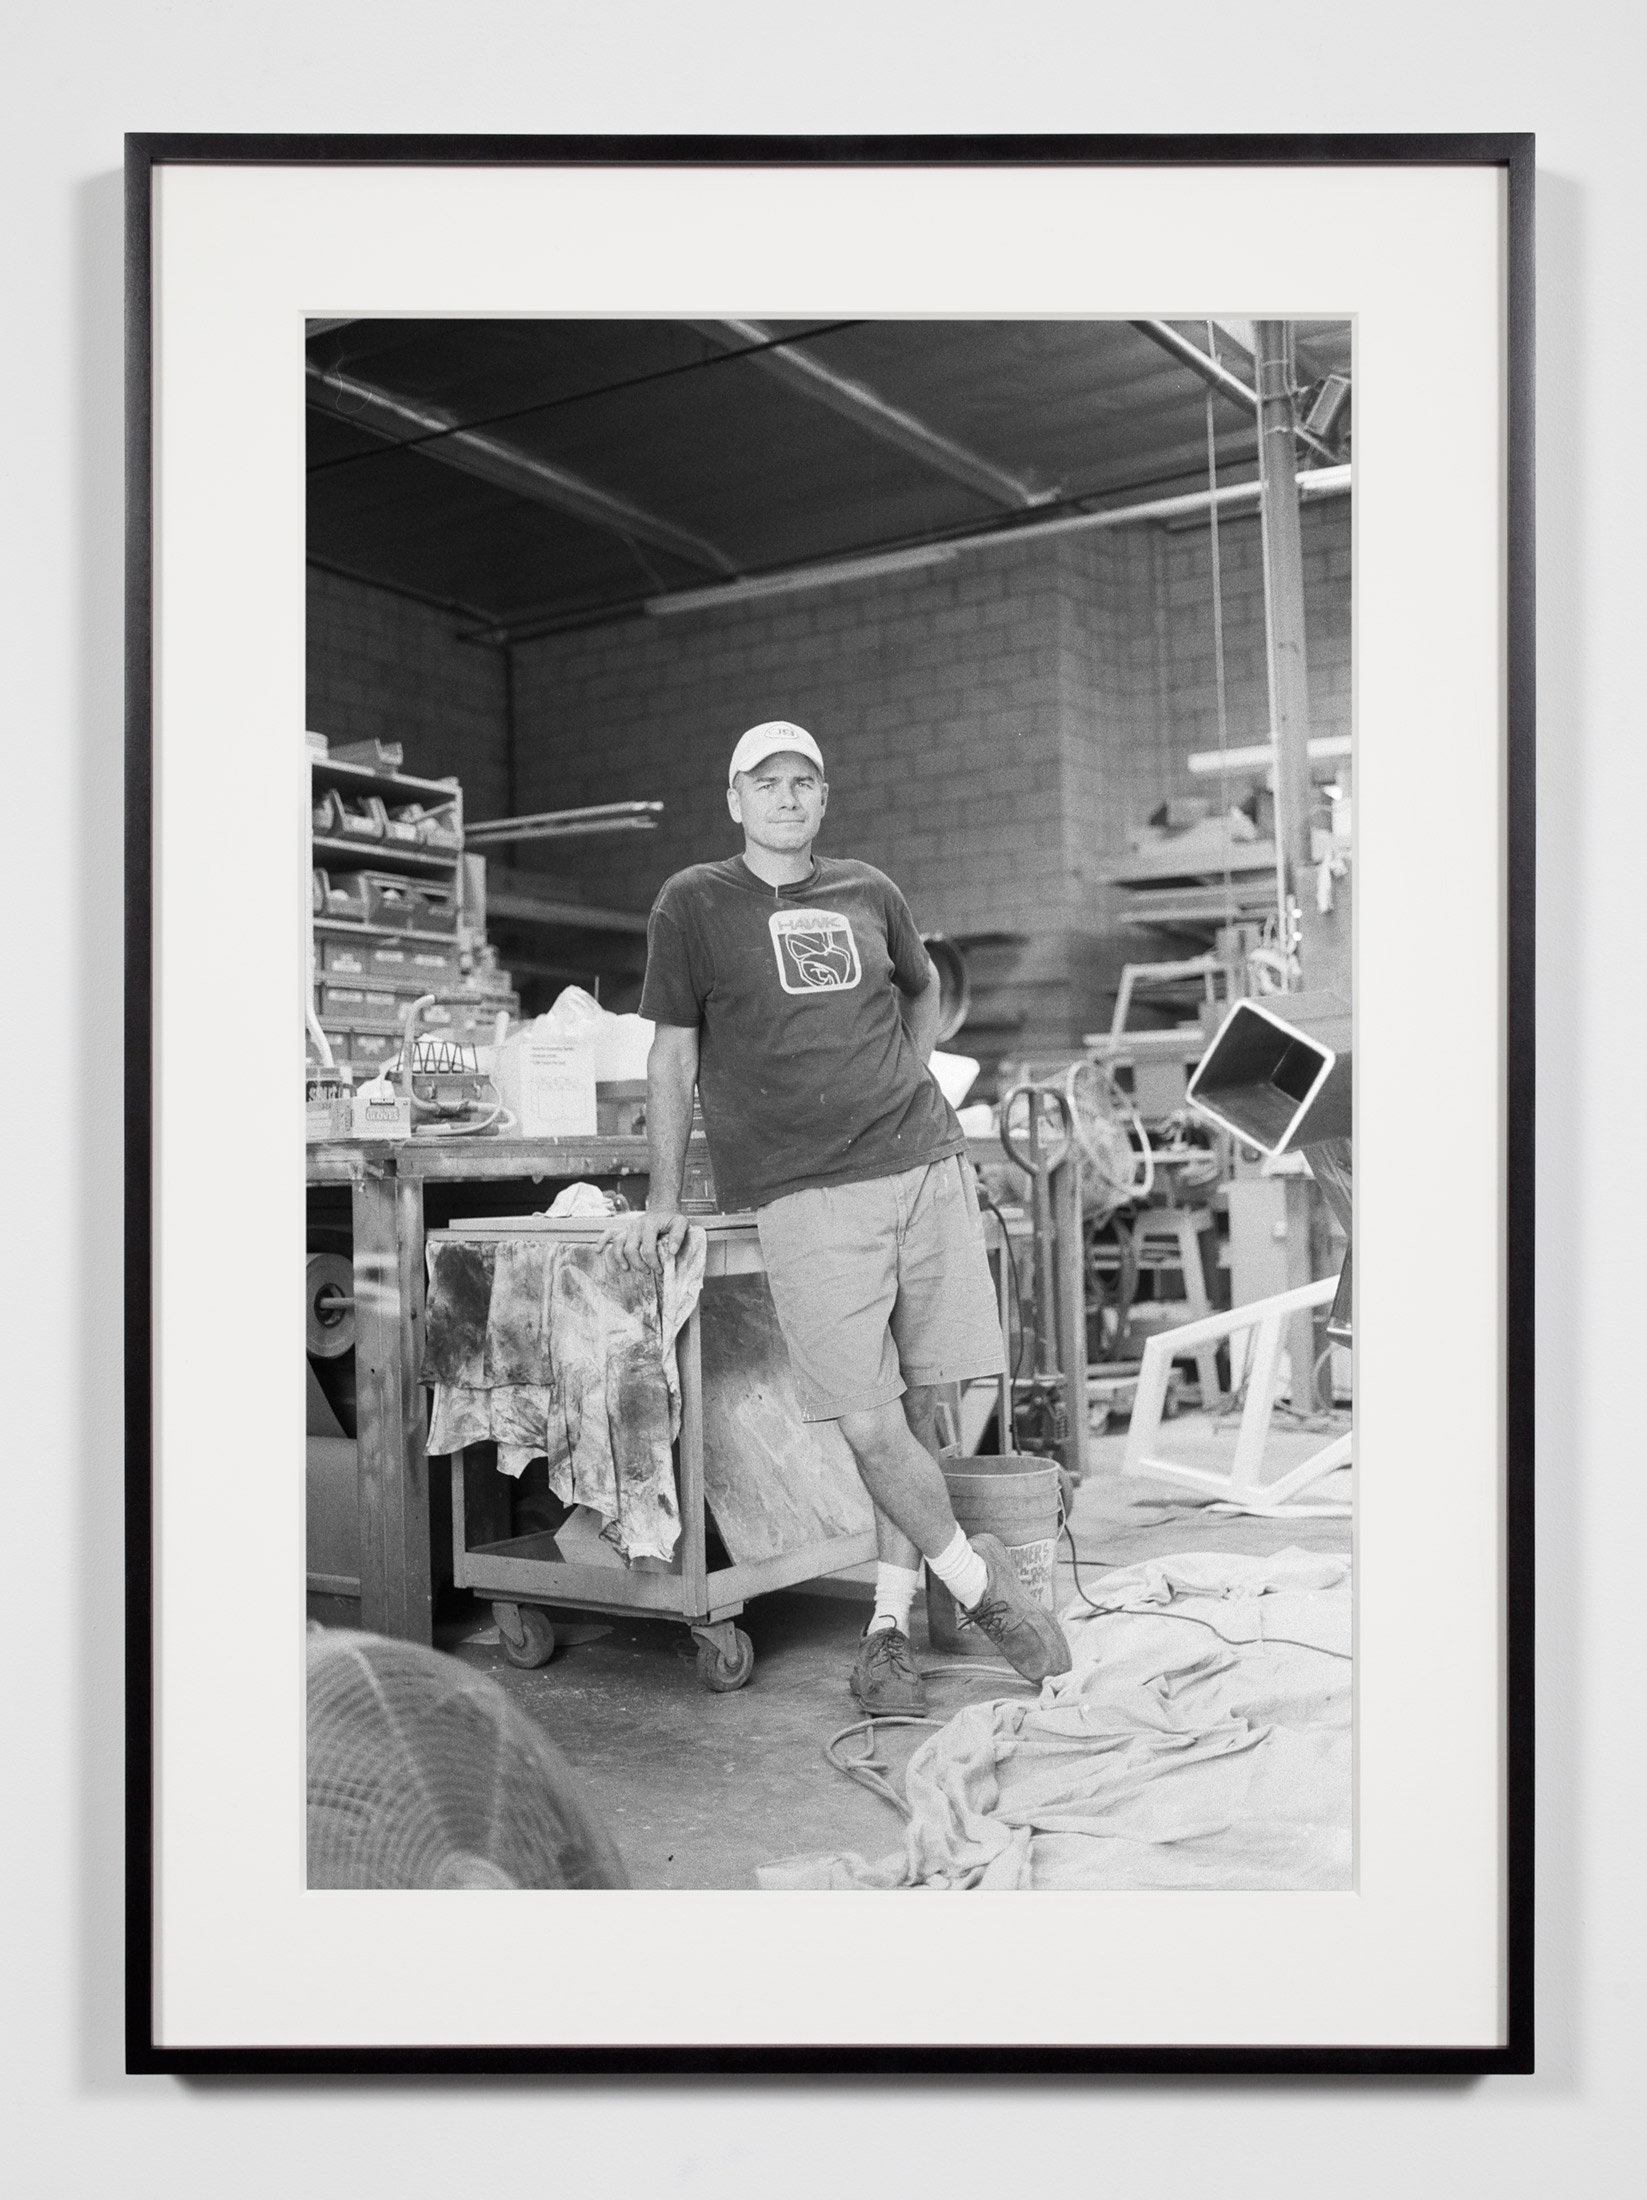   Fabricator (JD), Glendale, California, July 9, 2008    2009   Epson Ultrachrome K3 archival ink jet print on Hahnemühle Photo Rag paper  36 3/8 x 26 3/8 inches   Industrial Portraits, 2008–     